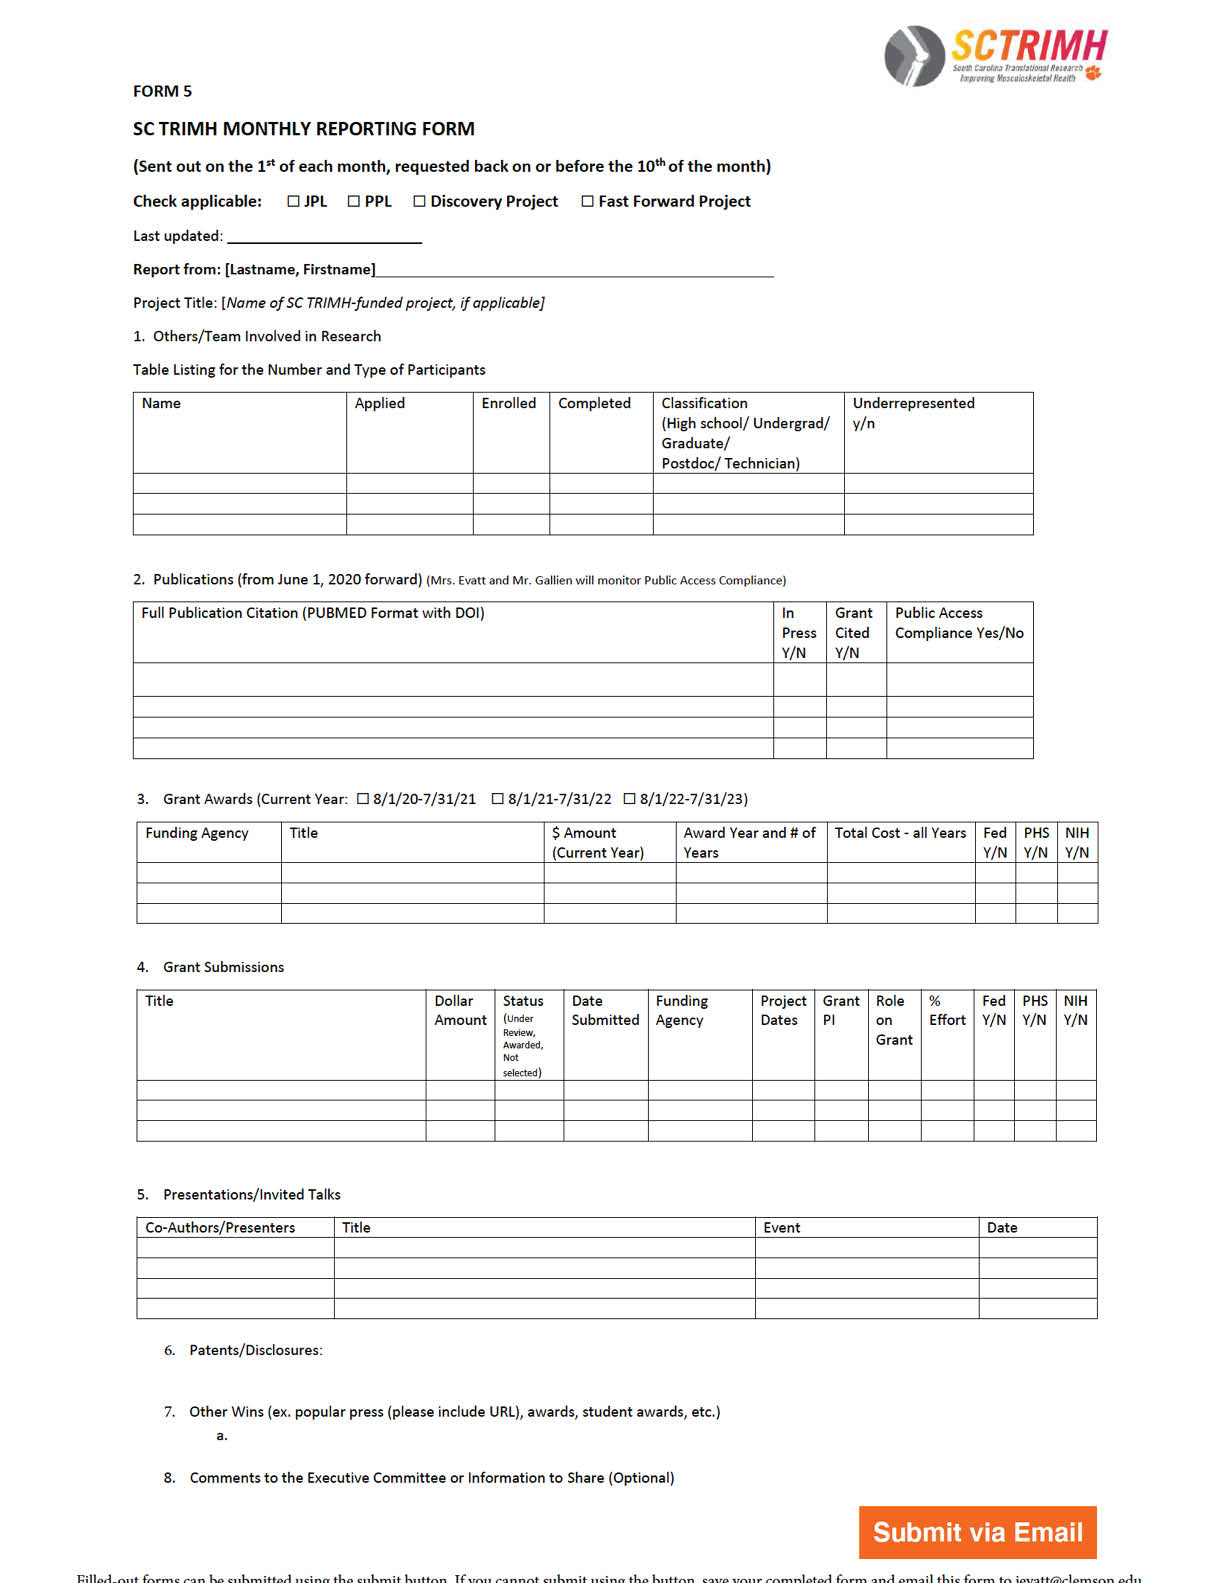 Monthly reporting form